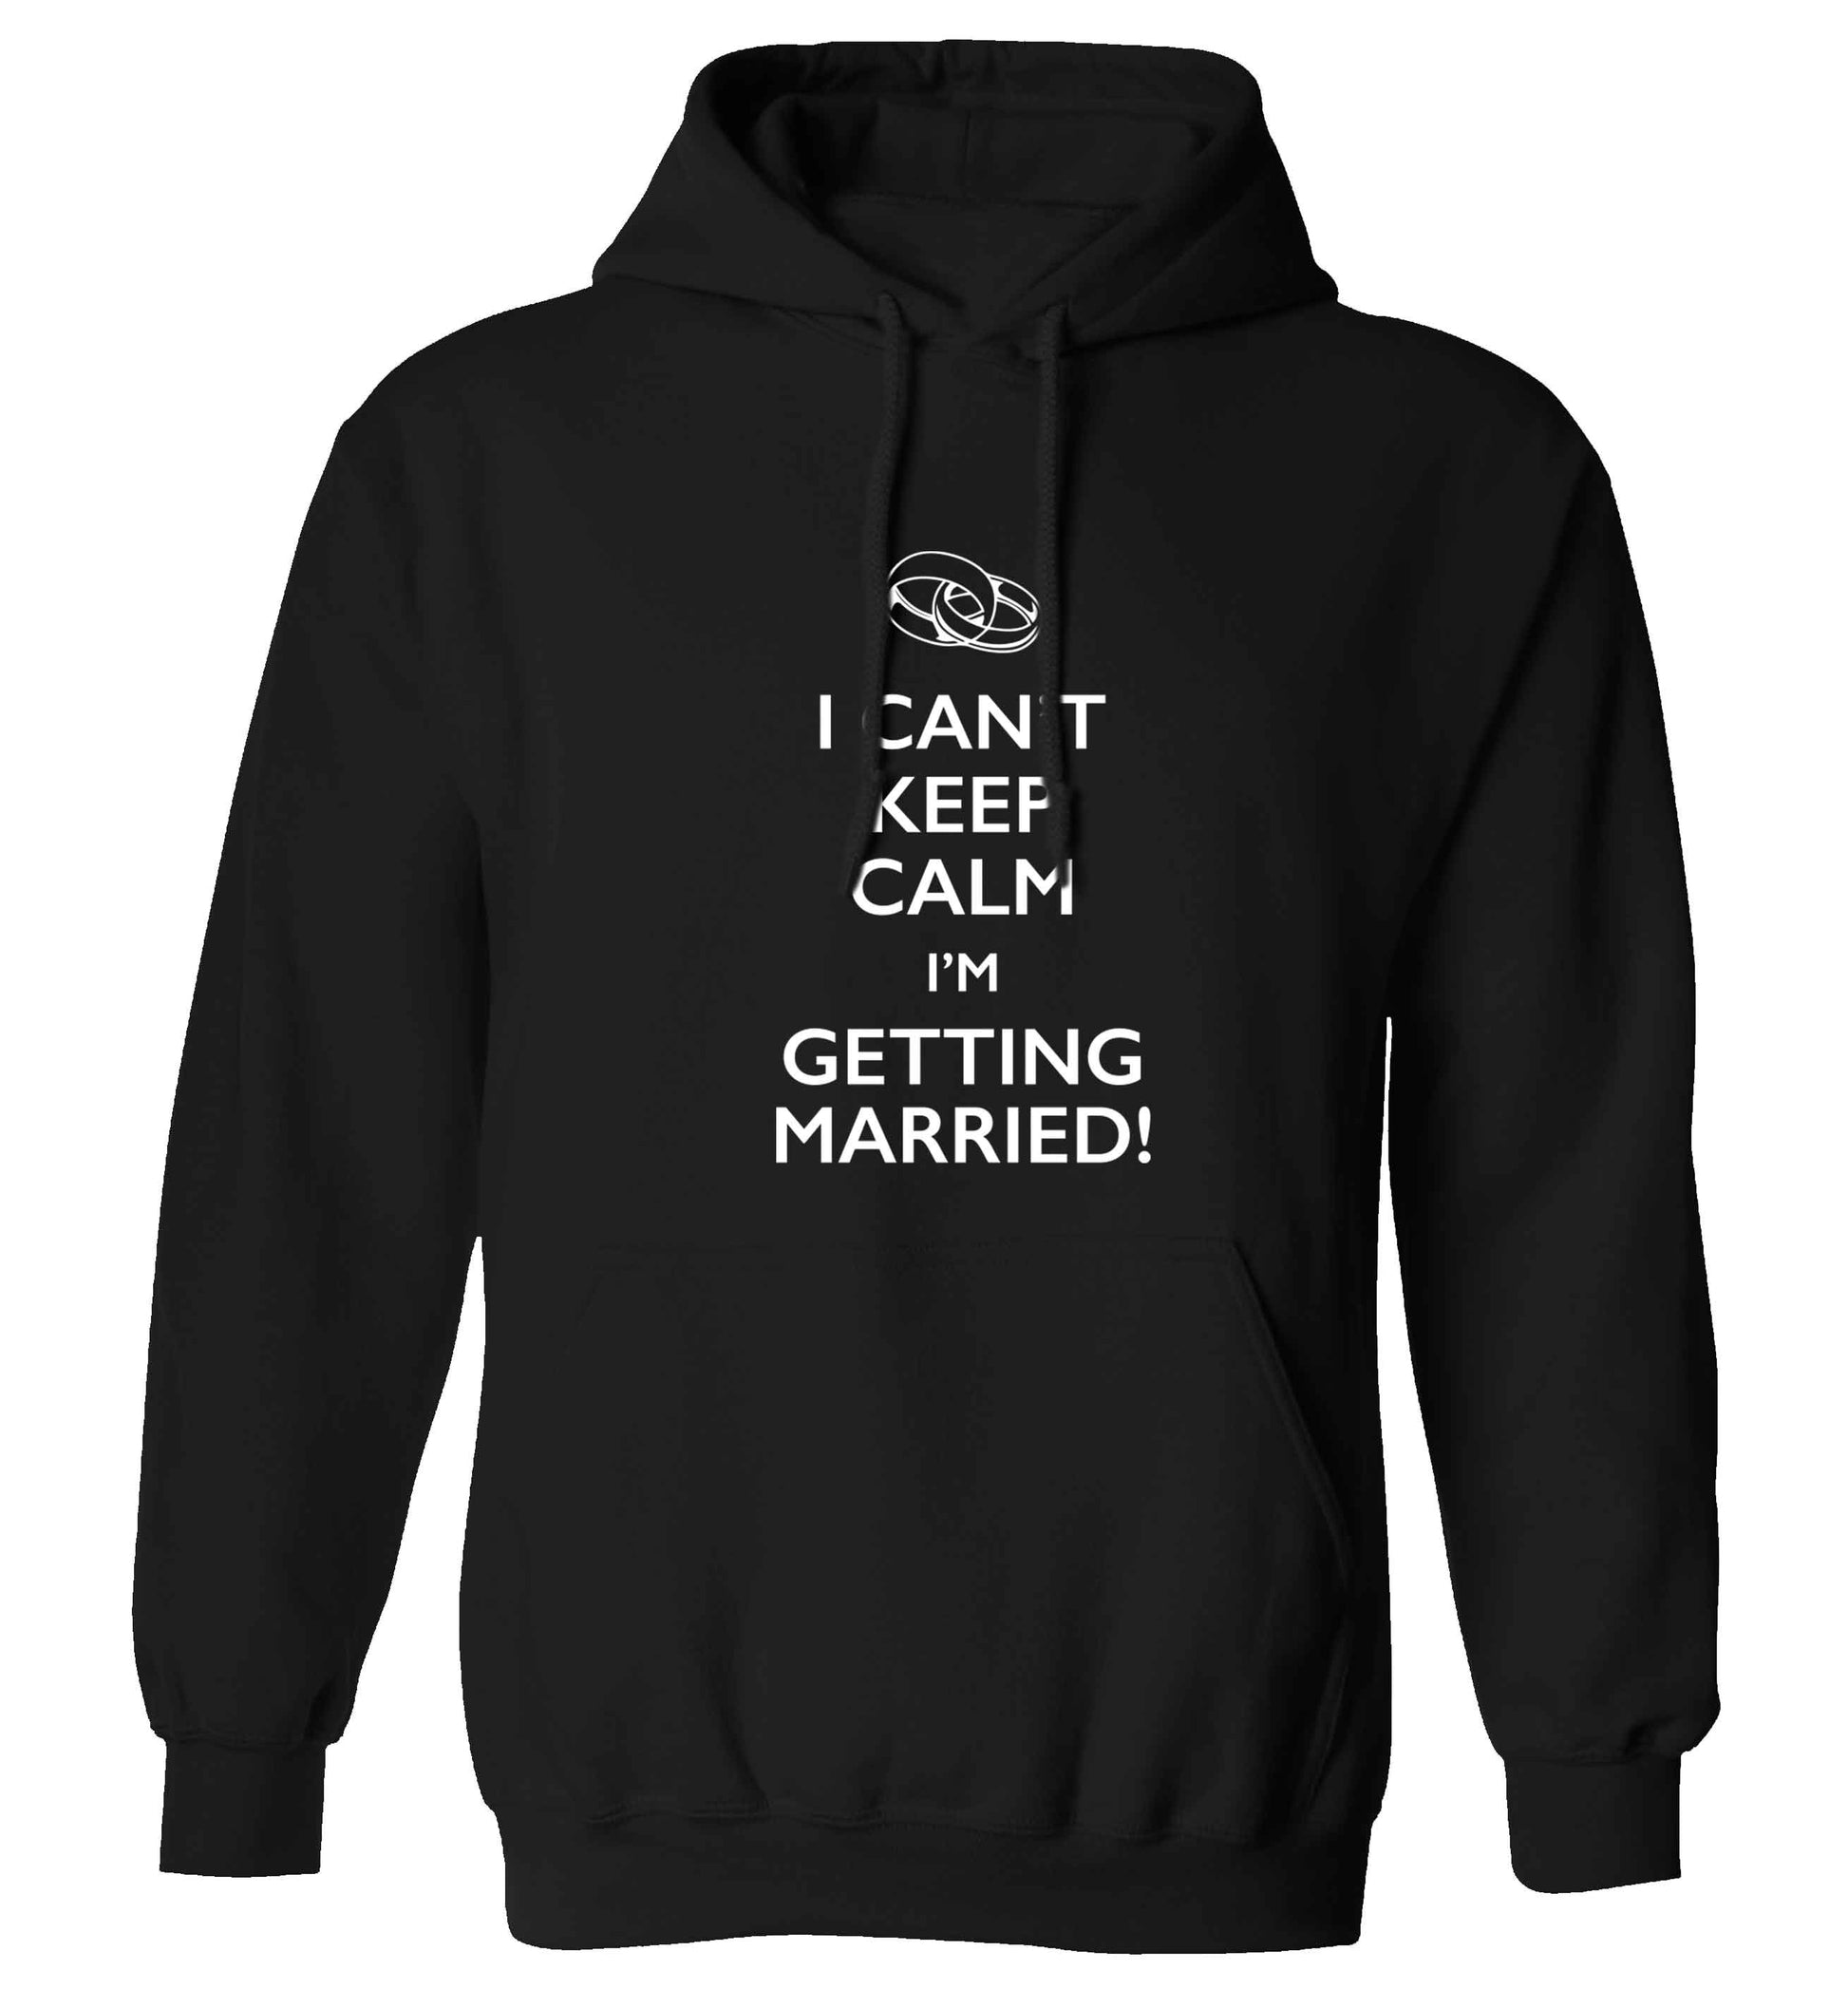 I can't keep calm I'm getting married! adults unisex black hoodie 2XL